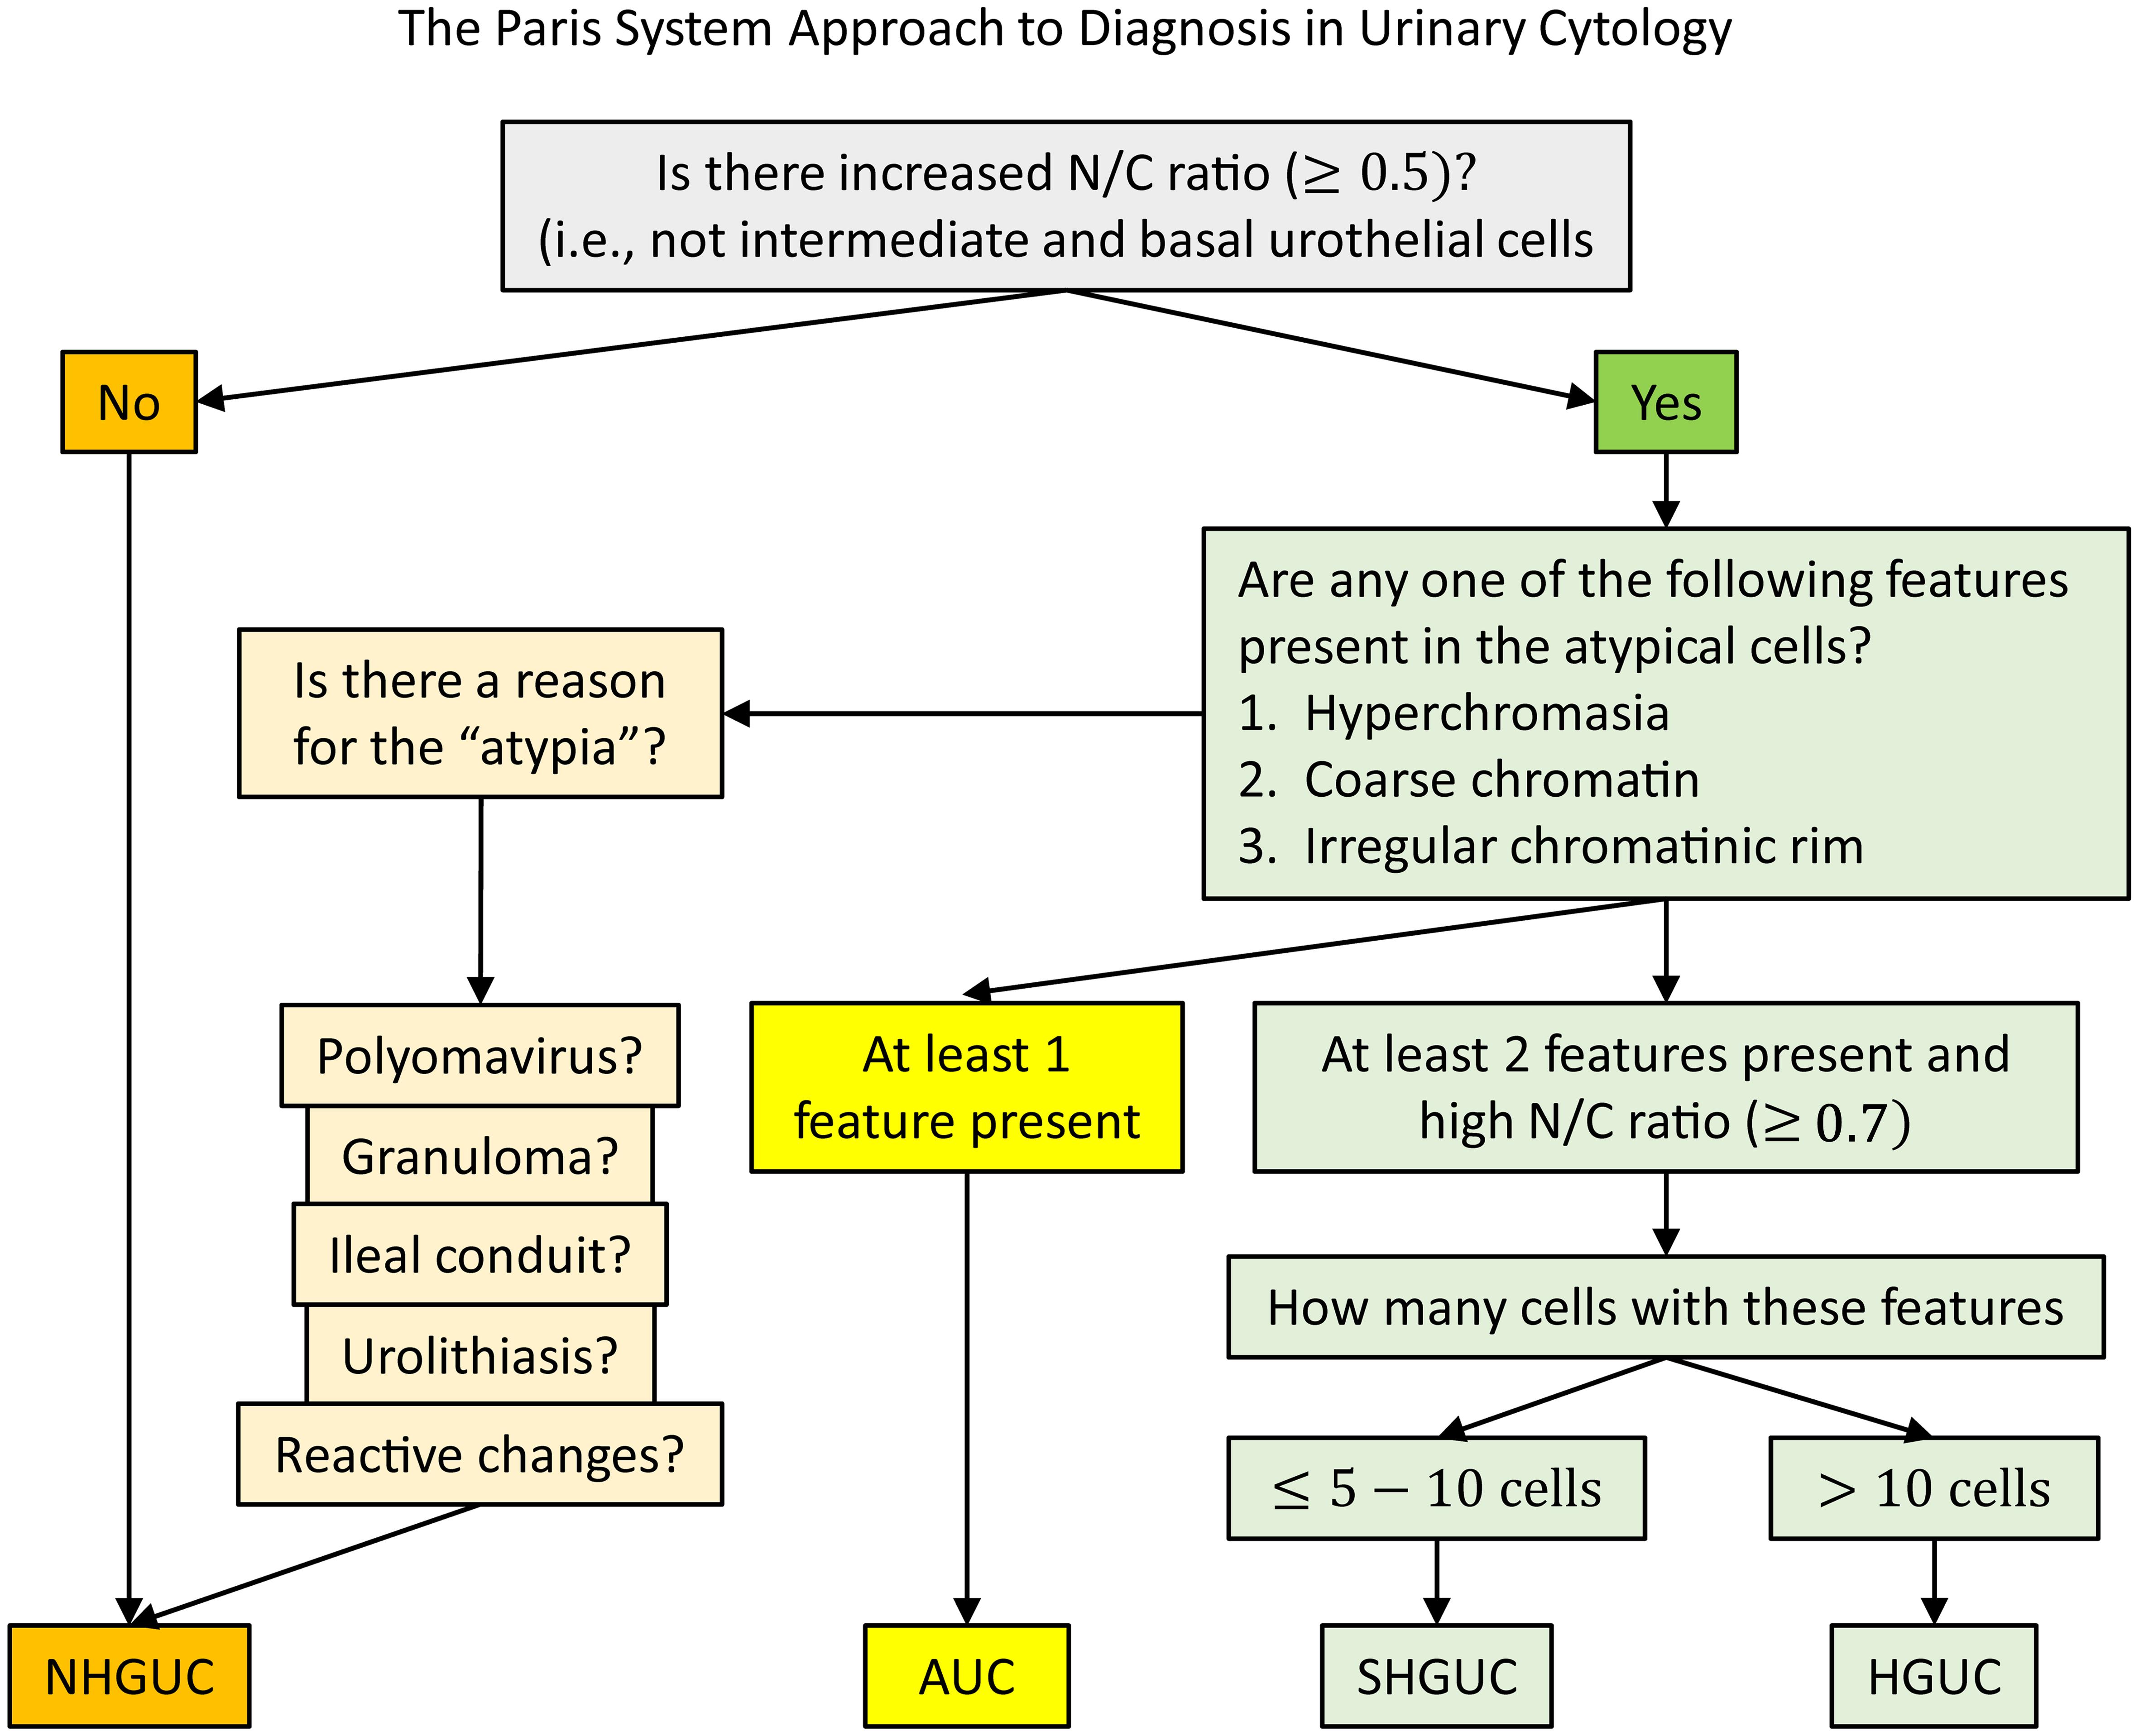 Graphic algorithm of the Paris System for Reporting Urinary Cytology decision tree.